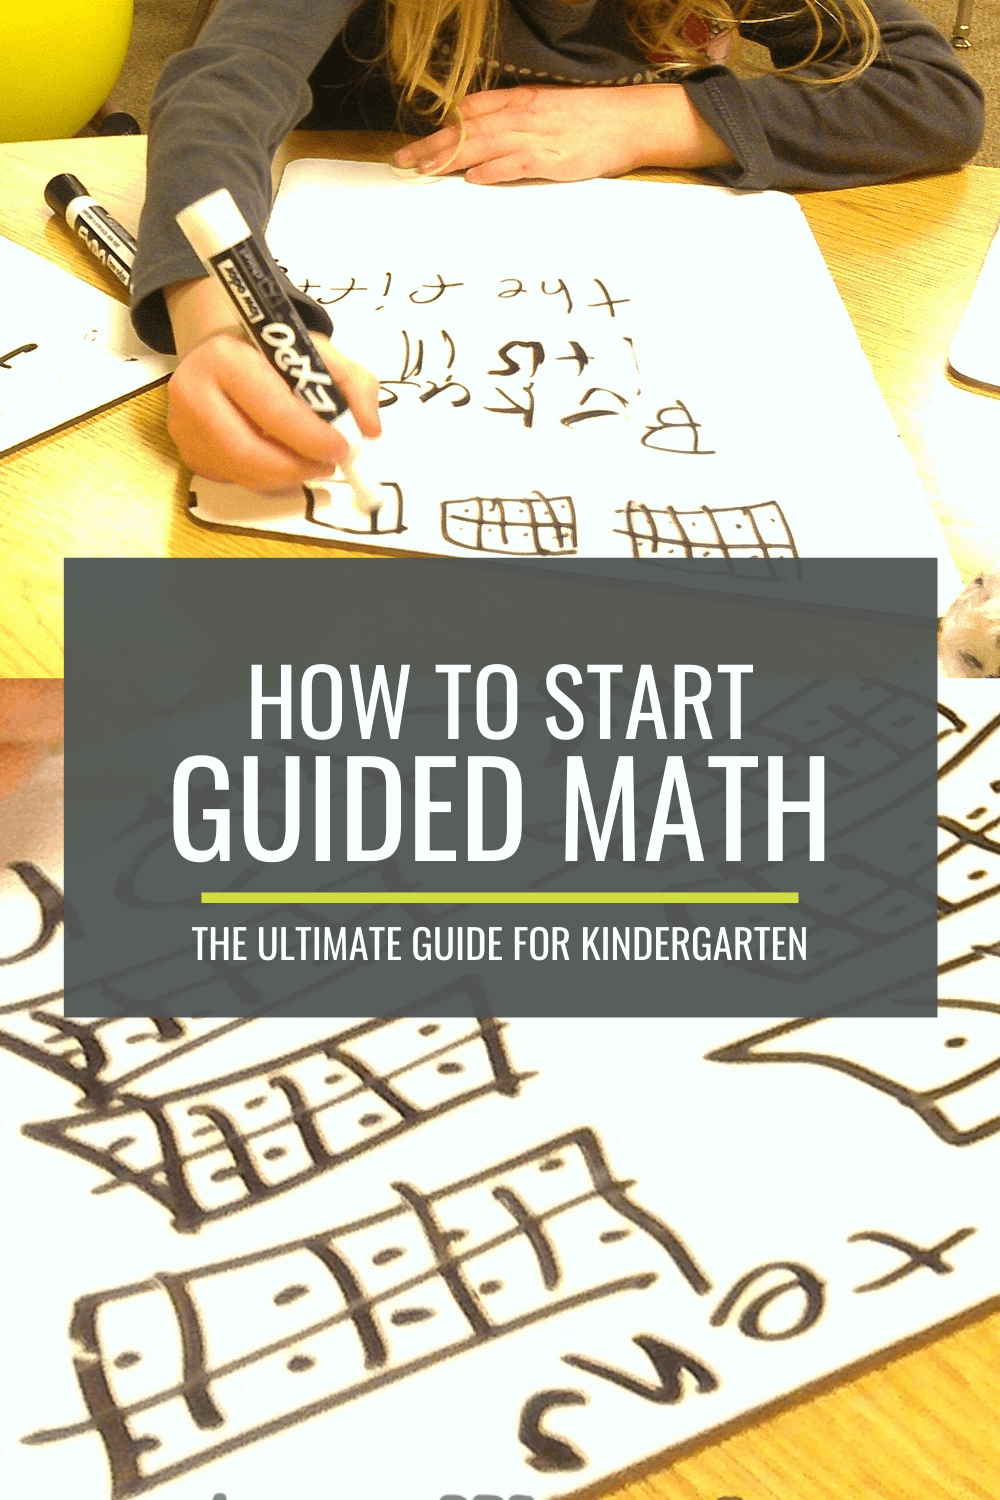 How to Start Guided Math in Kindergarten